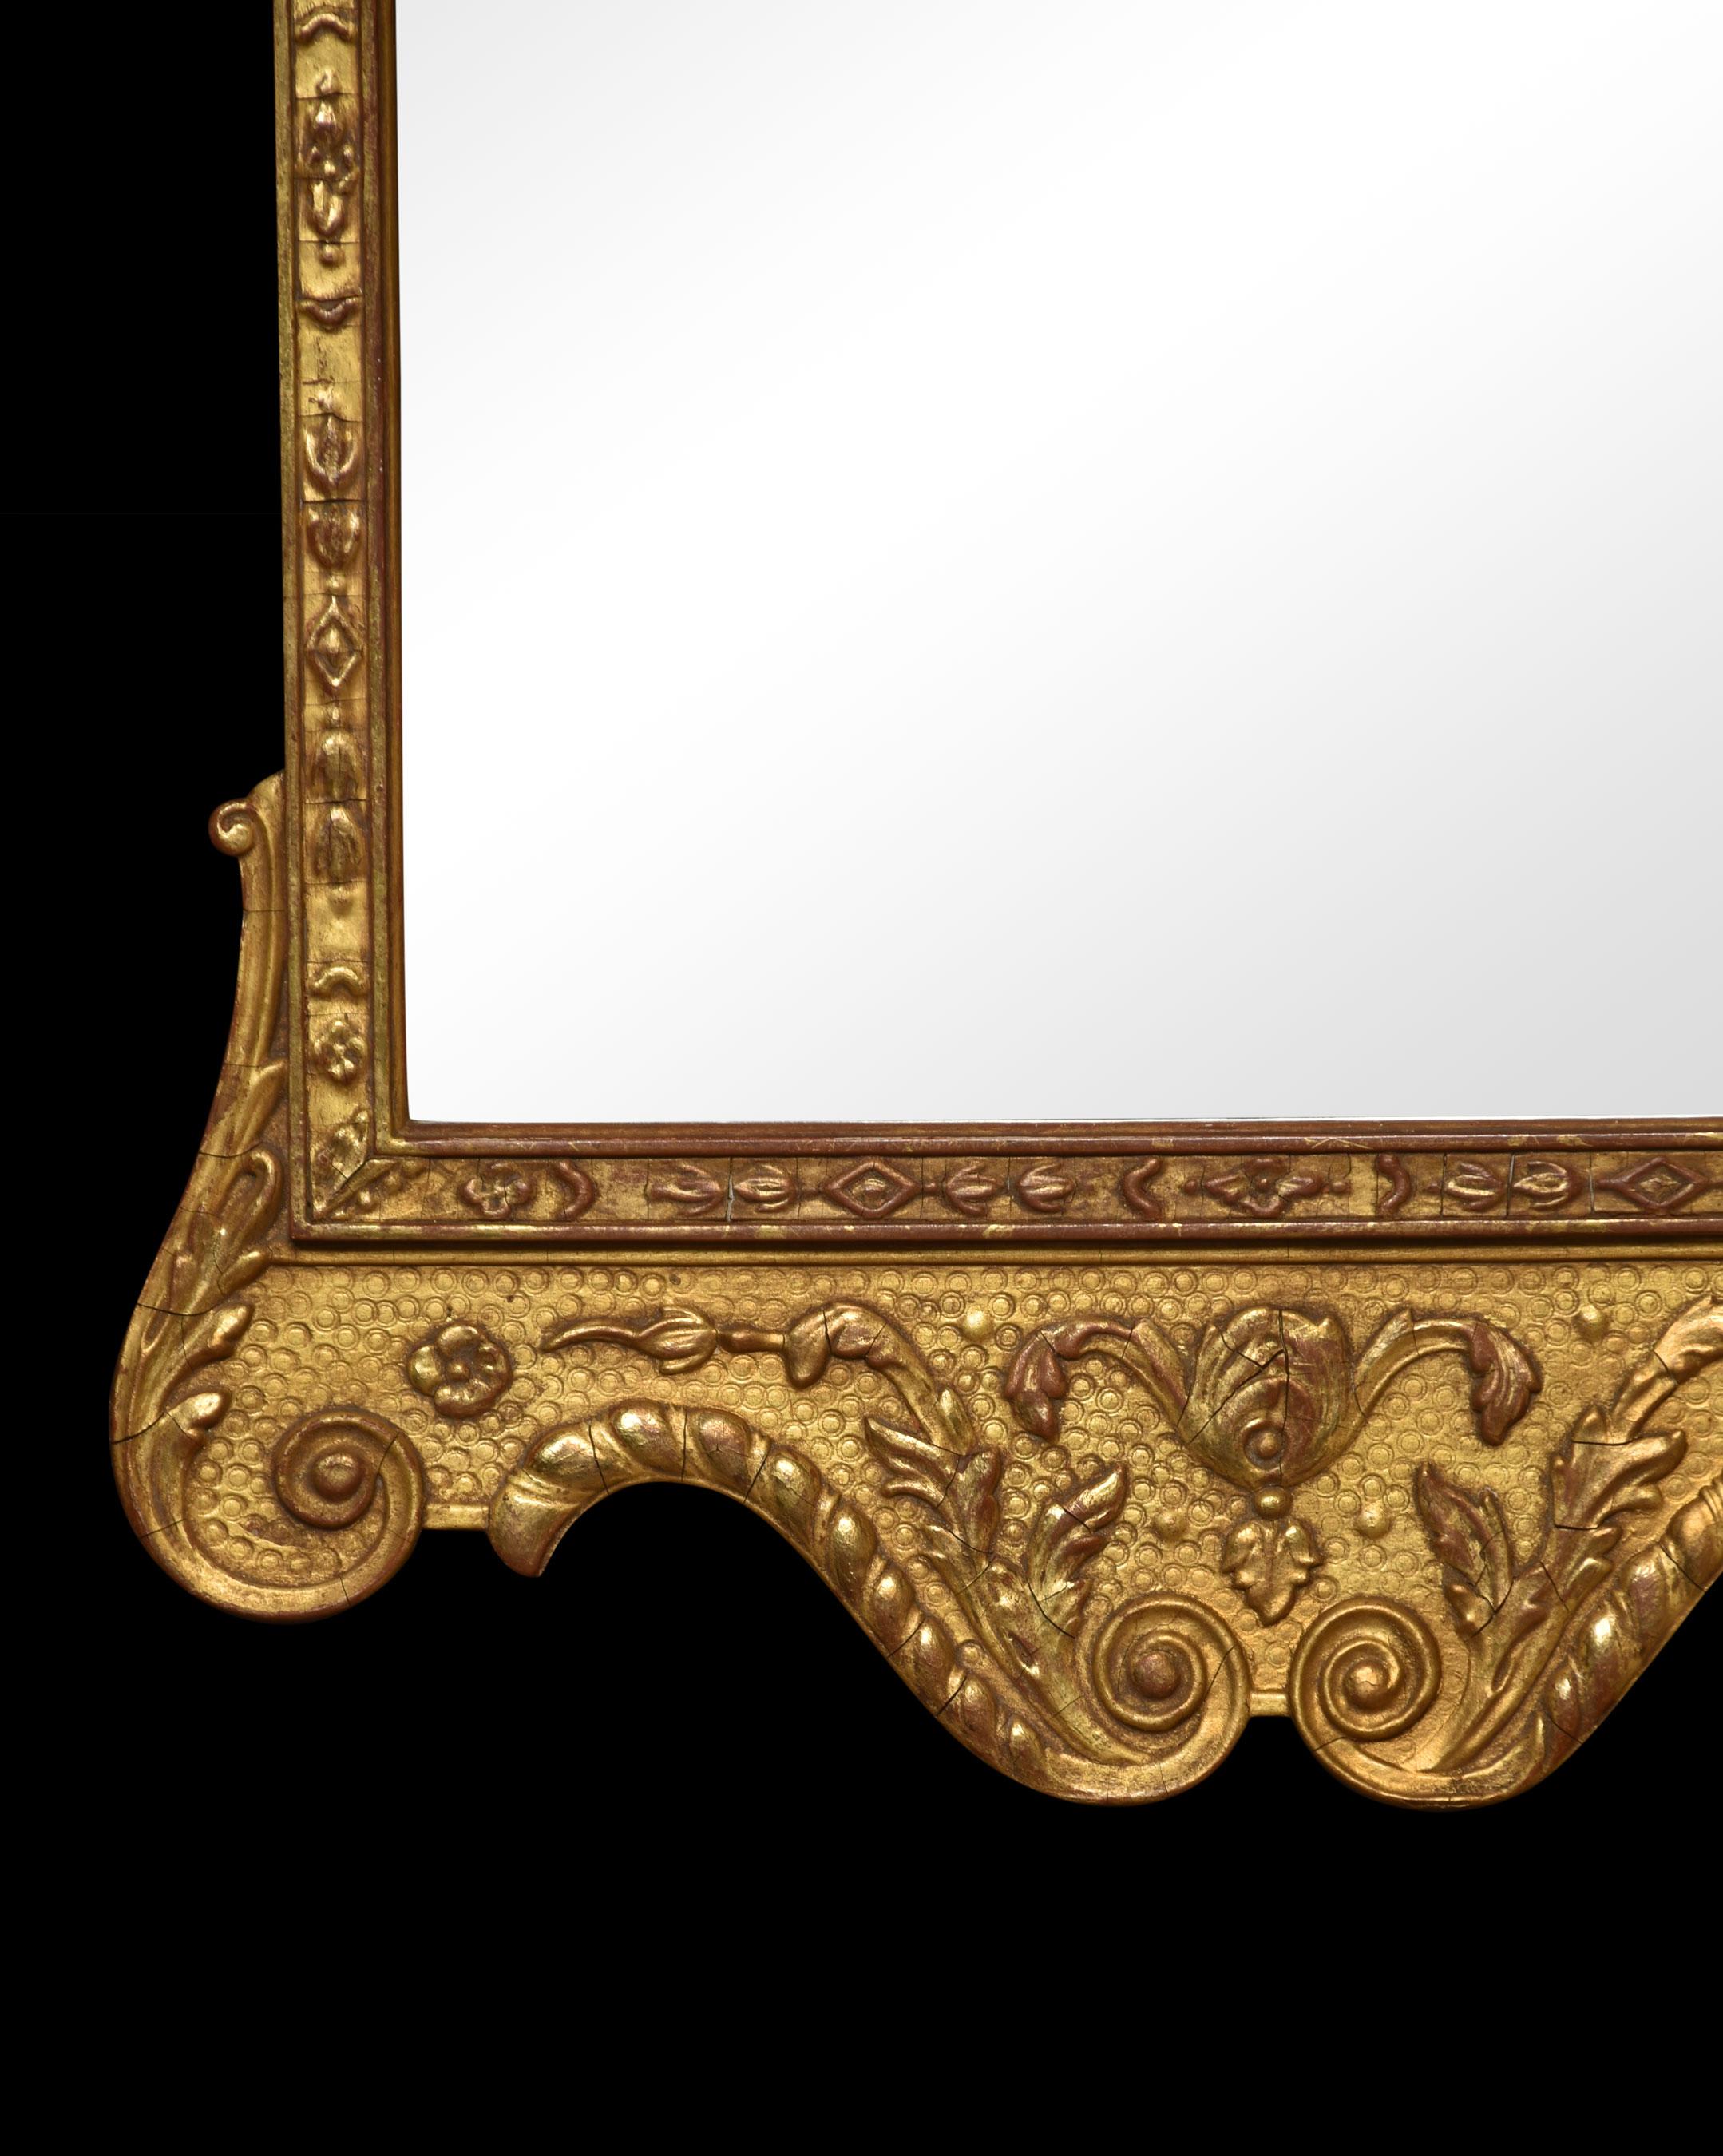 Carved gilt-wood wall mirror, with feathers crest above the original mirror plate surrounded in a gilt-wood frame with leaf and scrolling detail.
Dimensions
Height 32.5 Inches
Width 17.5 Inches
Depth 2 Inches